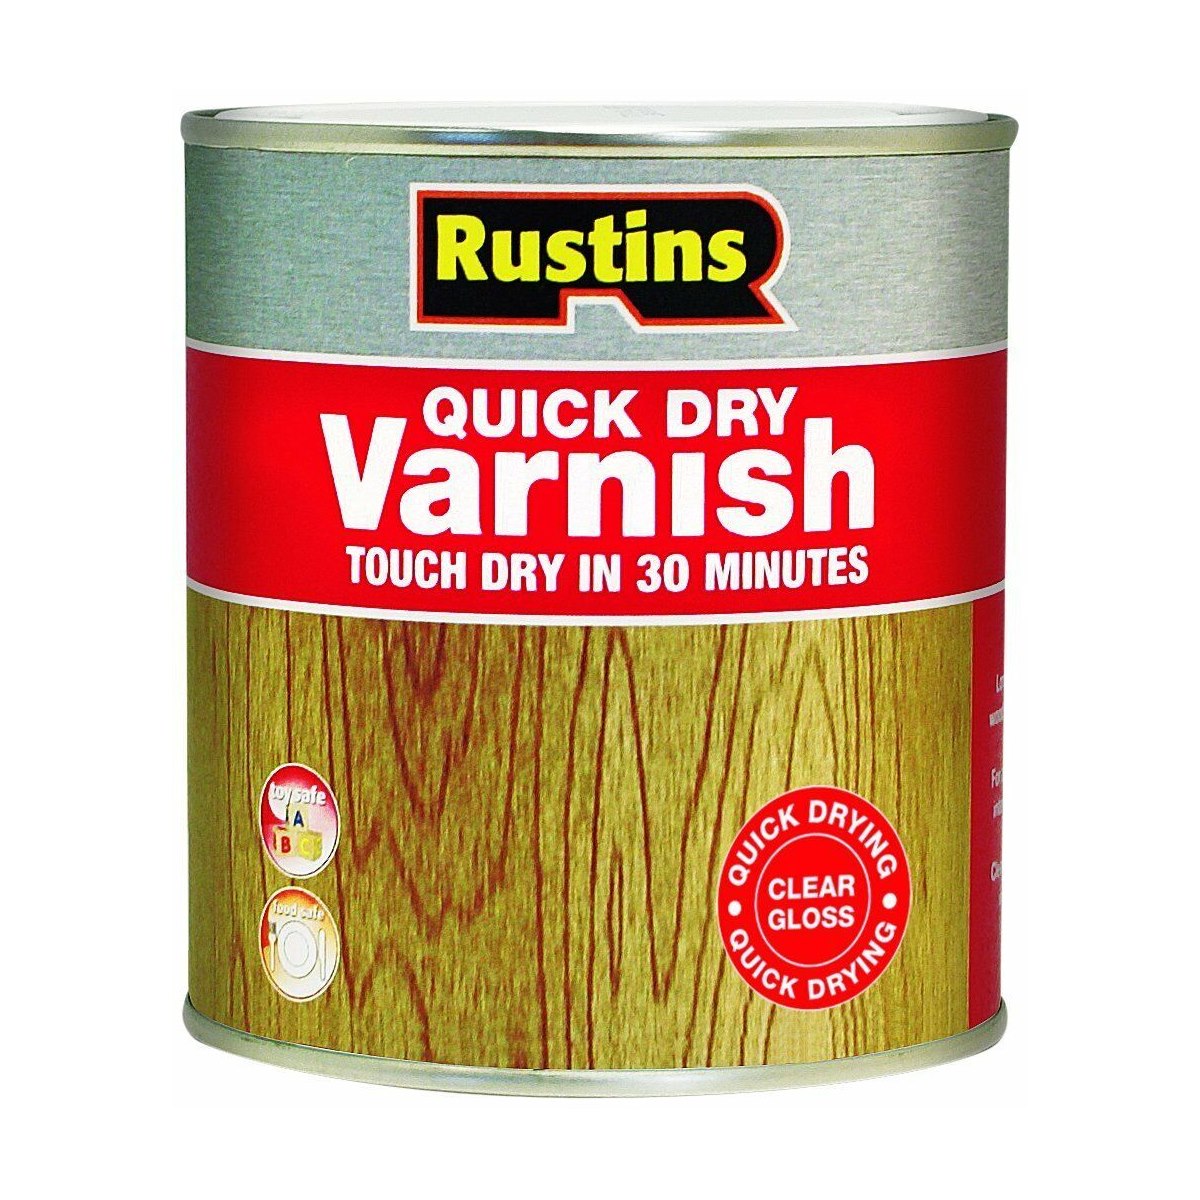 Rustins Quick Dry Varnish Gloss Clear 2.5 Litre